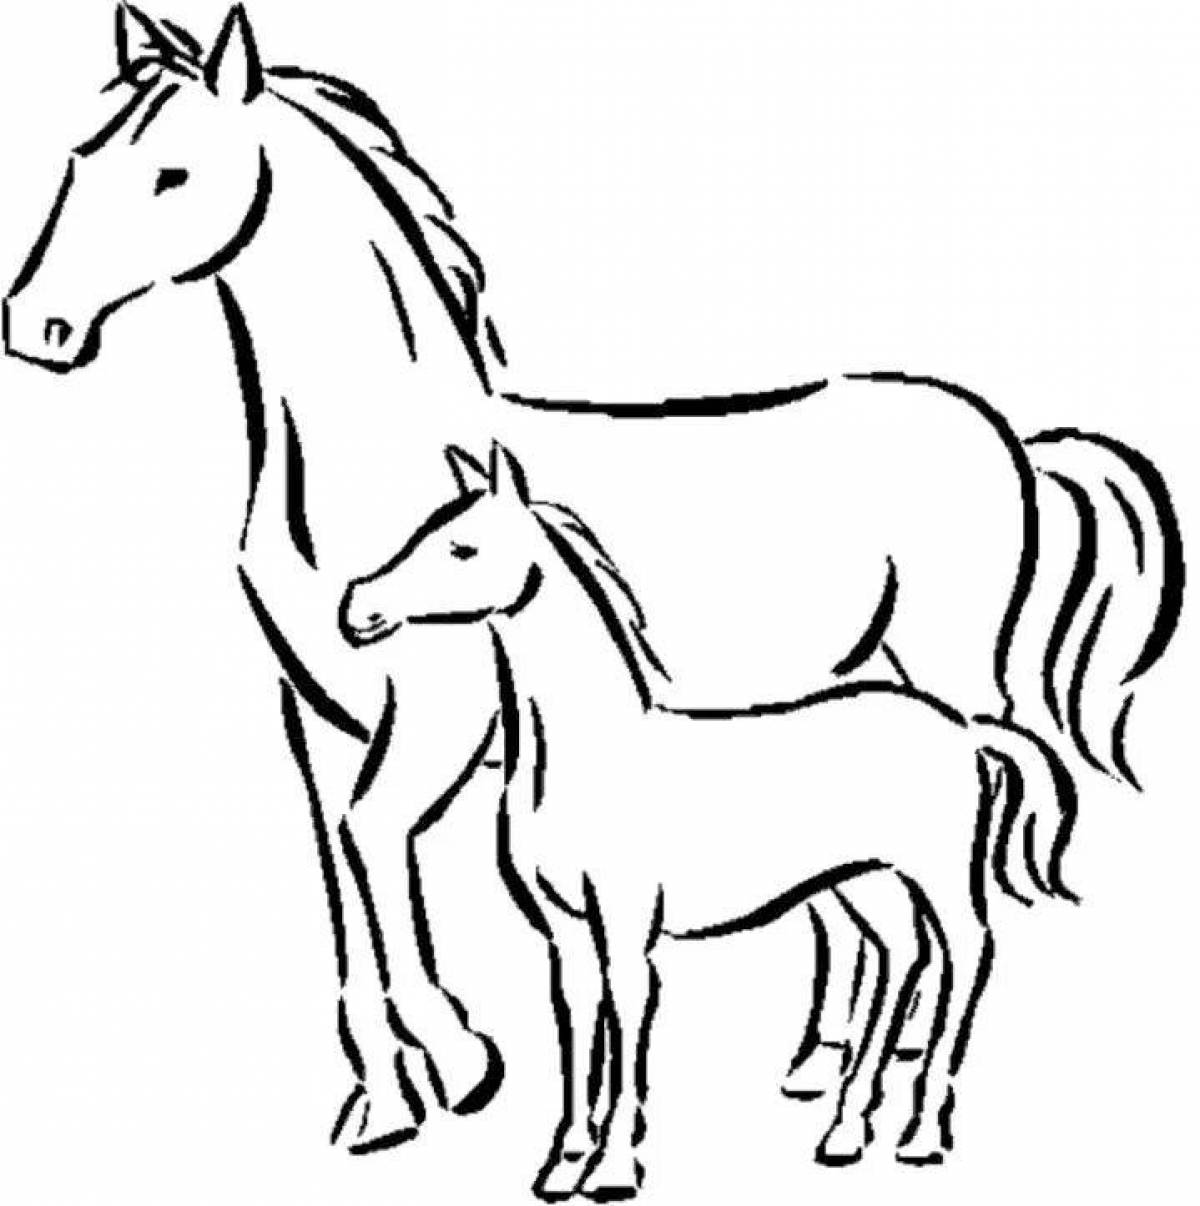 Coloring page graceful foal